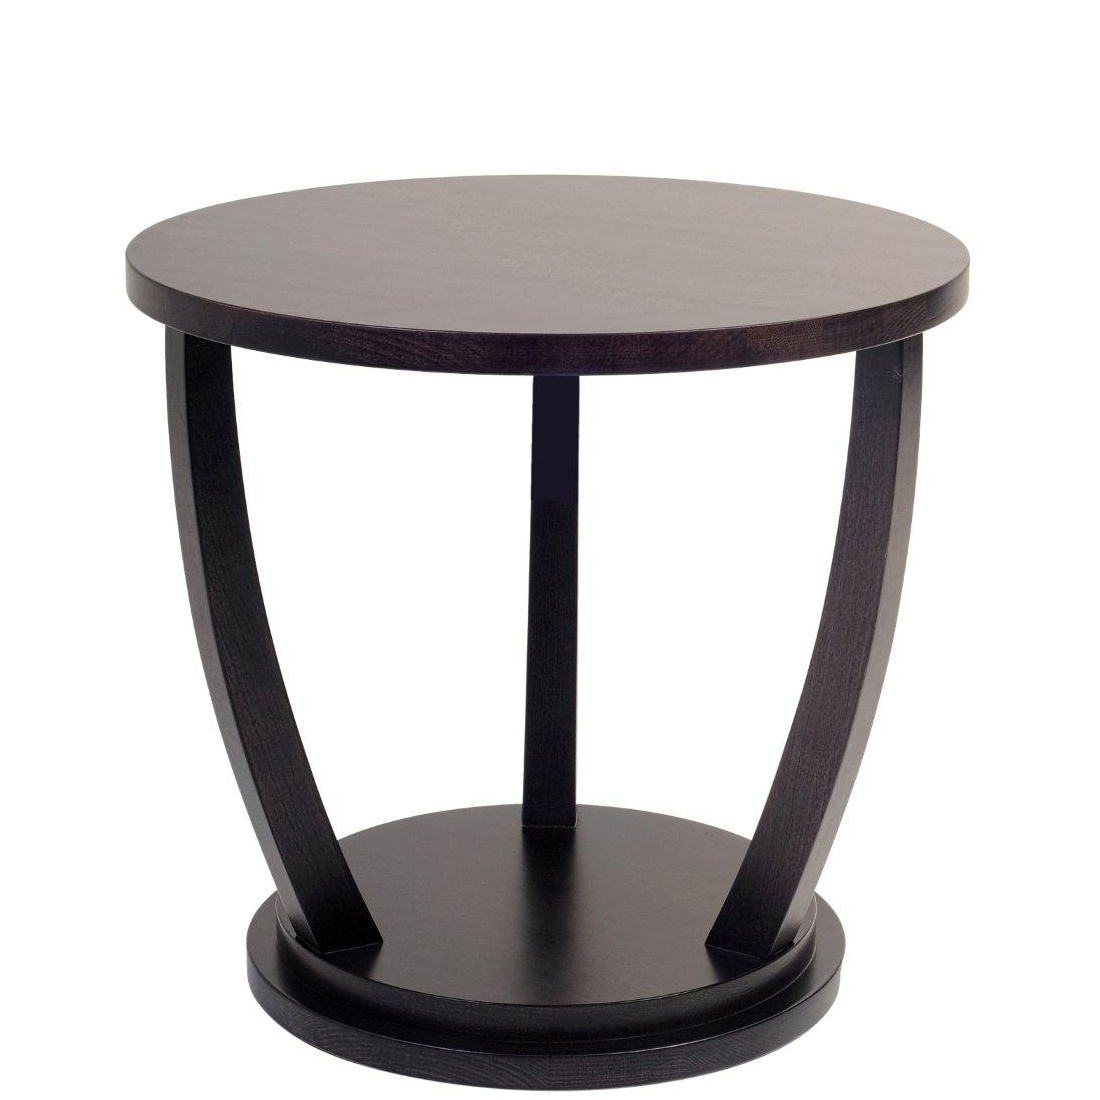 Round brown table